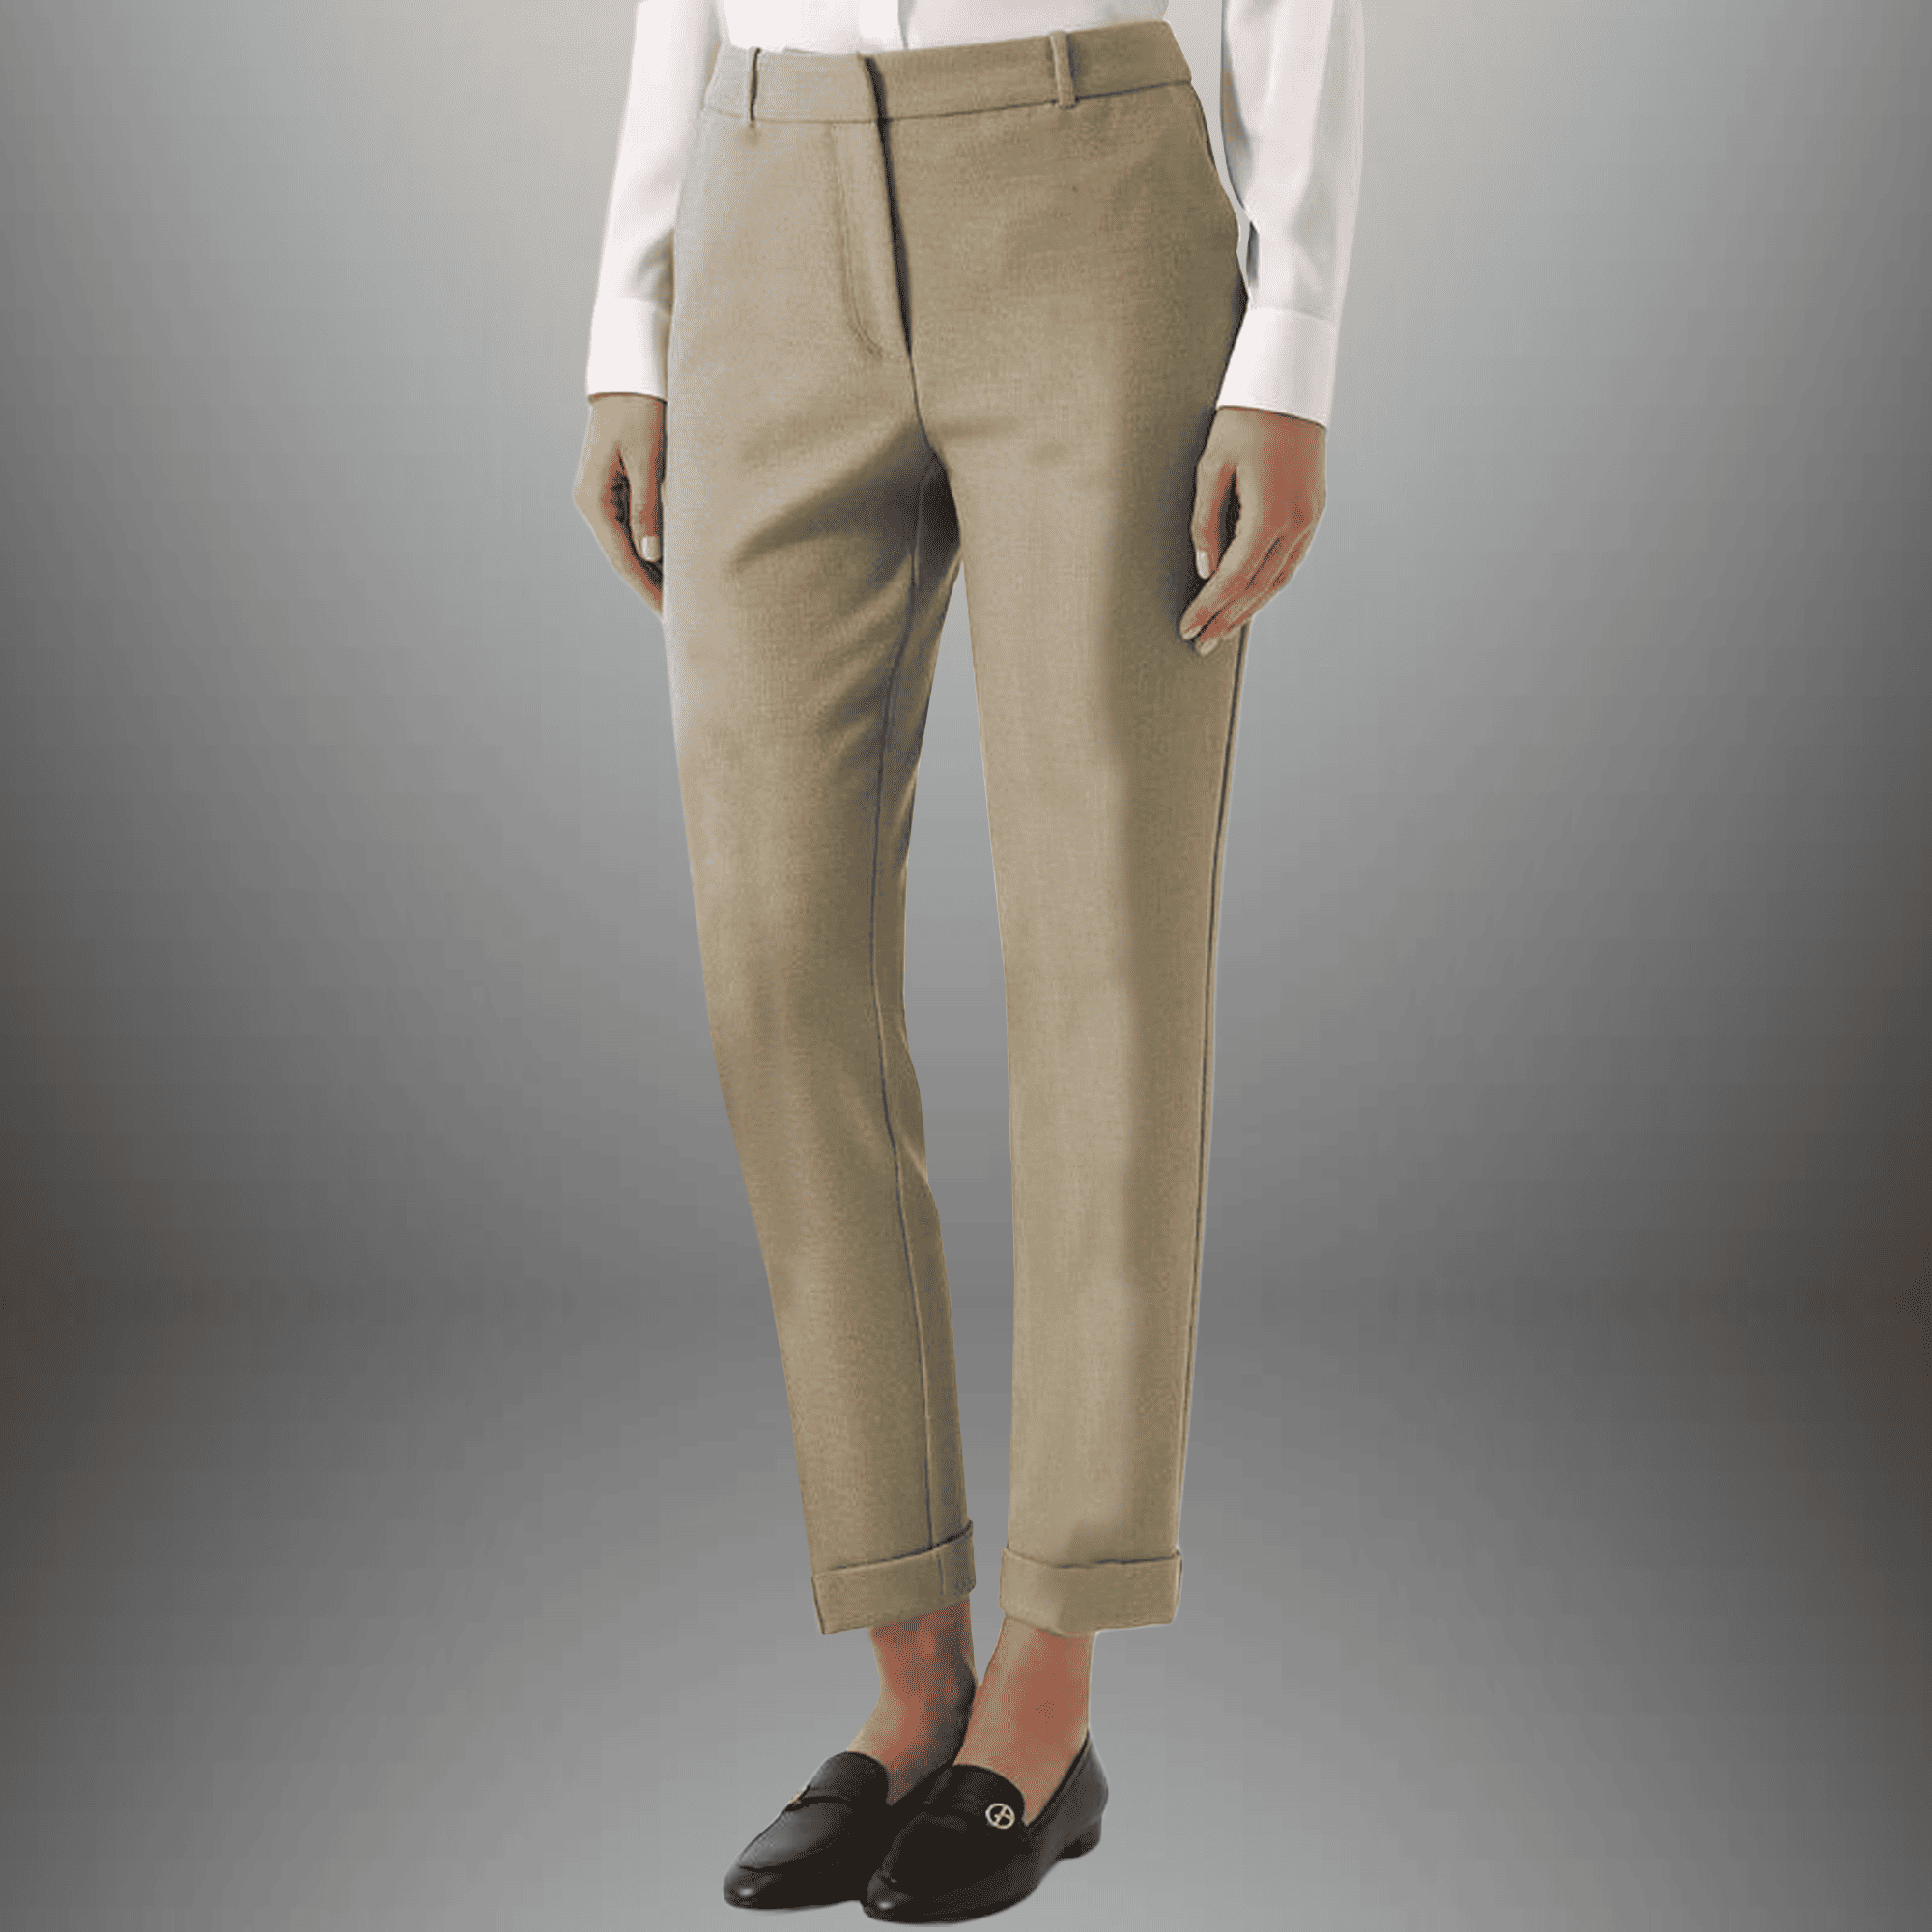 Women's off white color Formal Pant-RCP025